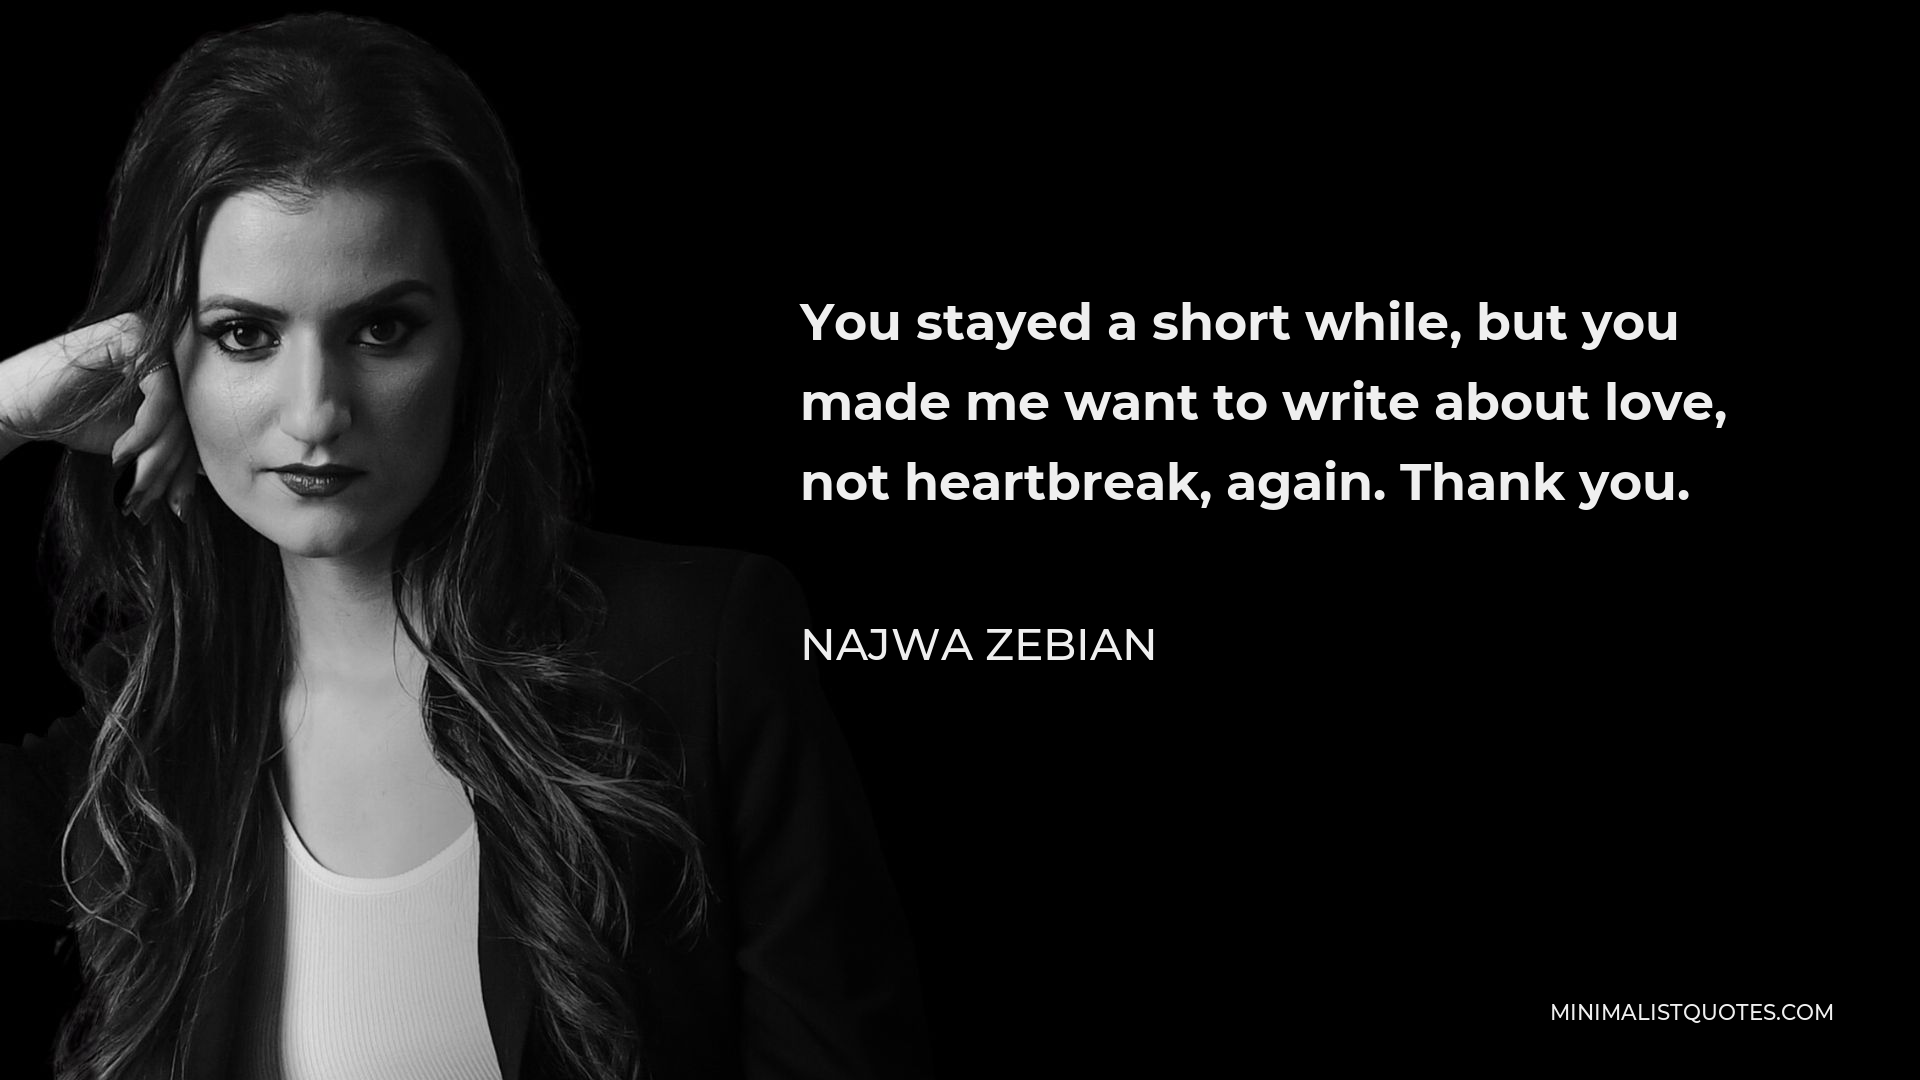 Najwa Zebian Quote - You stayed a short while, but you made me want to write about love, not heartbreak, again. Thank you.